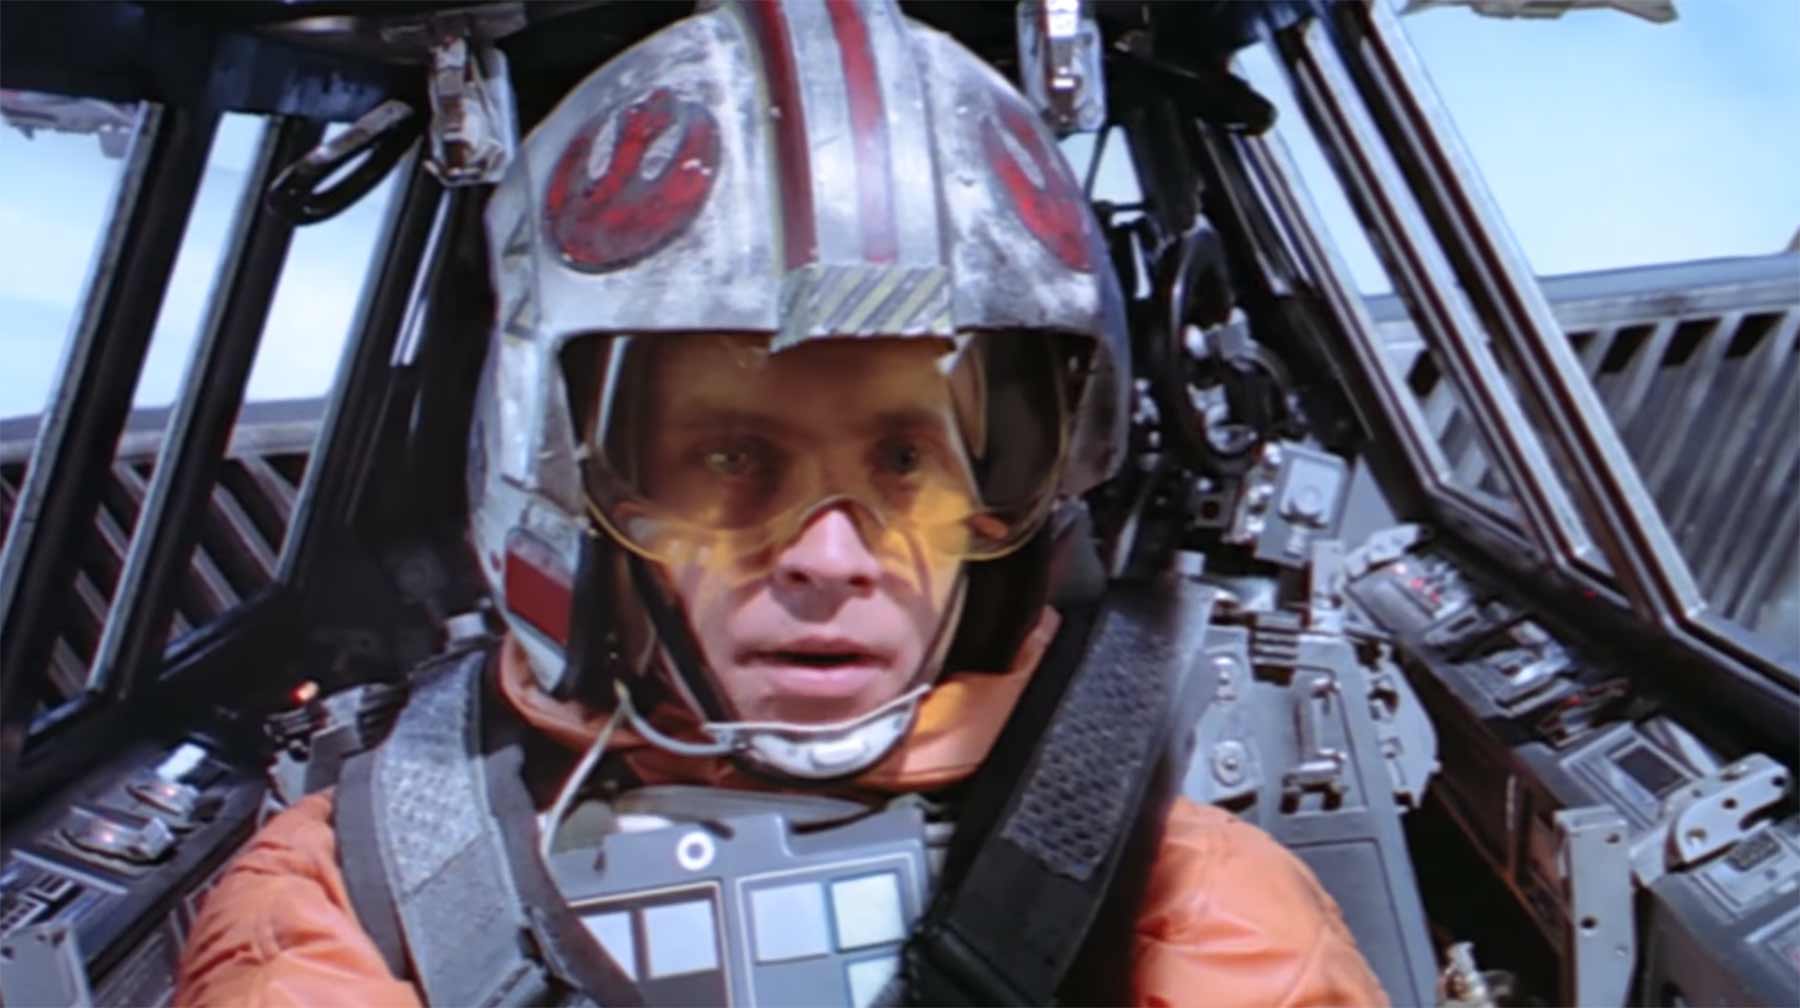 A Bad Lip Reading of The Empire Strikes Back bad-lip-reading-star-wars-empire-strikes-back 